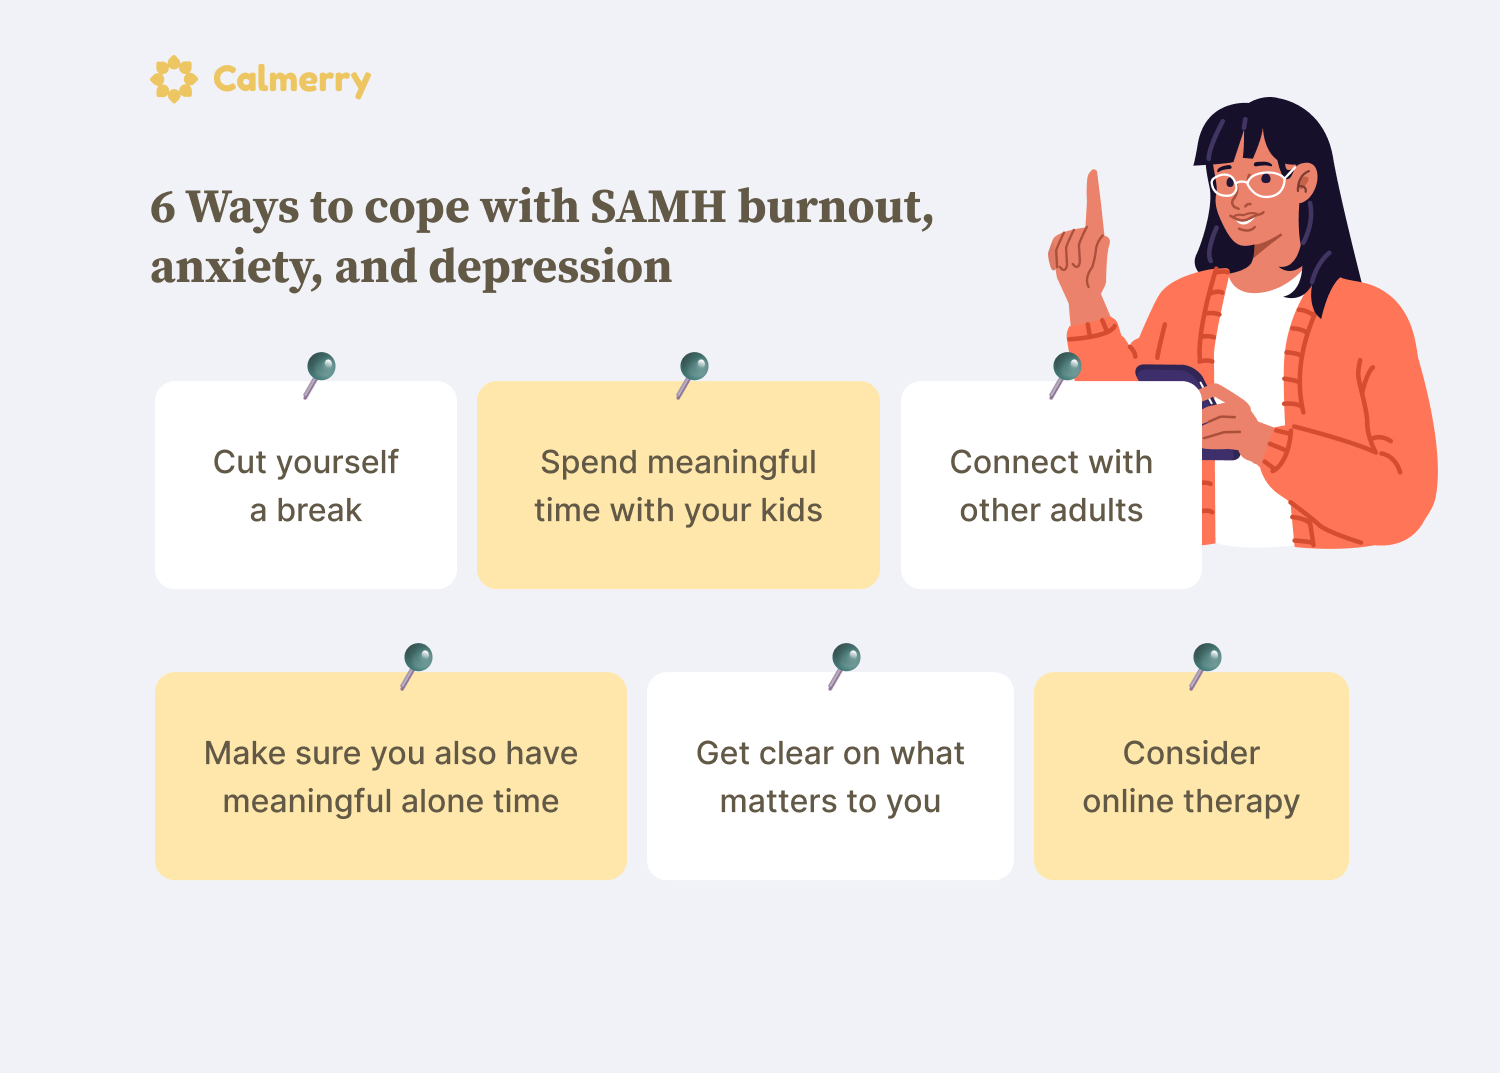 6 Ways to cope with SAMH burnout, anxiety, and depression